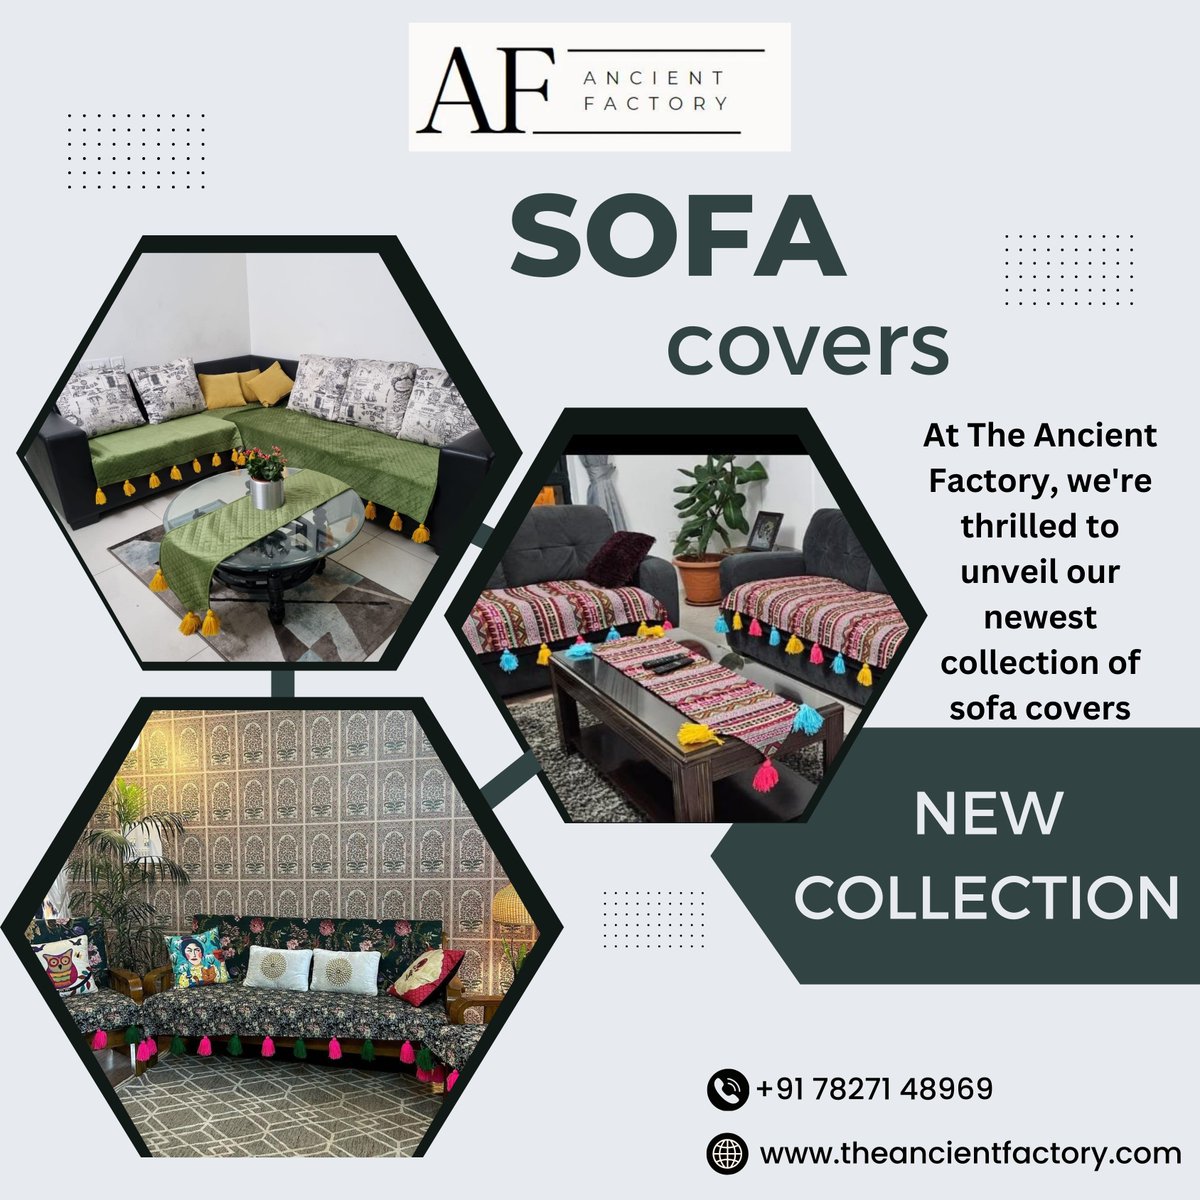 📱 Dial +91 78271 48969 or browse theancientfactory.com to discover the perfect sofa covers that add a touch of sophistication to your living space.
 ✨ #TheAncientFactory #SofaCovers #HomeDecor #EleganceRedefined